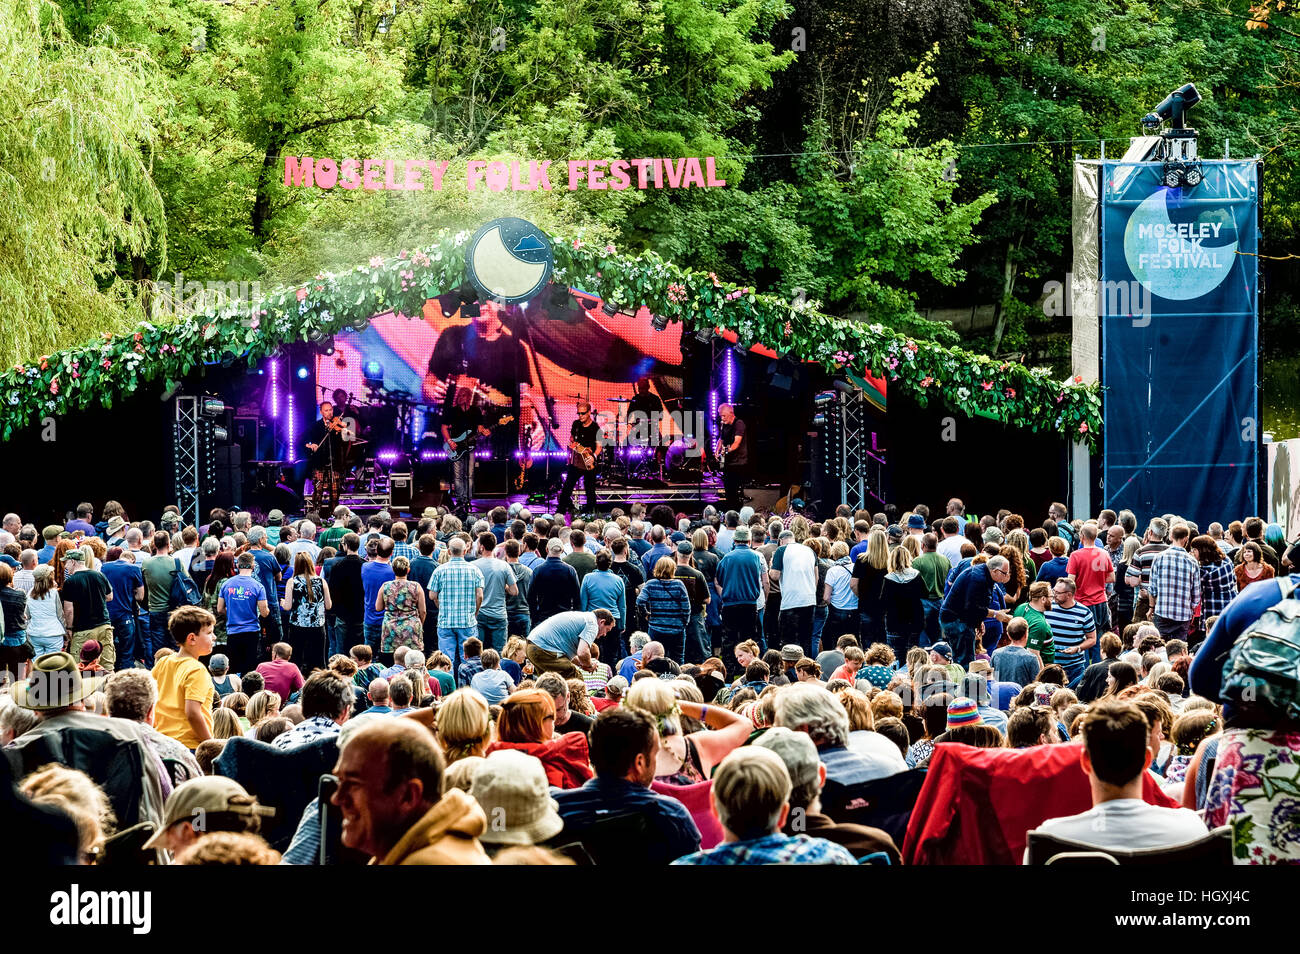 Festival crowd watching Oyster band at Moseley Folk Festival Birmingham UK. Stock Photo